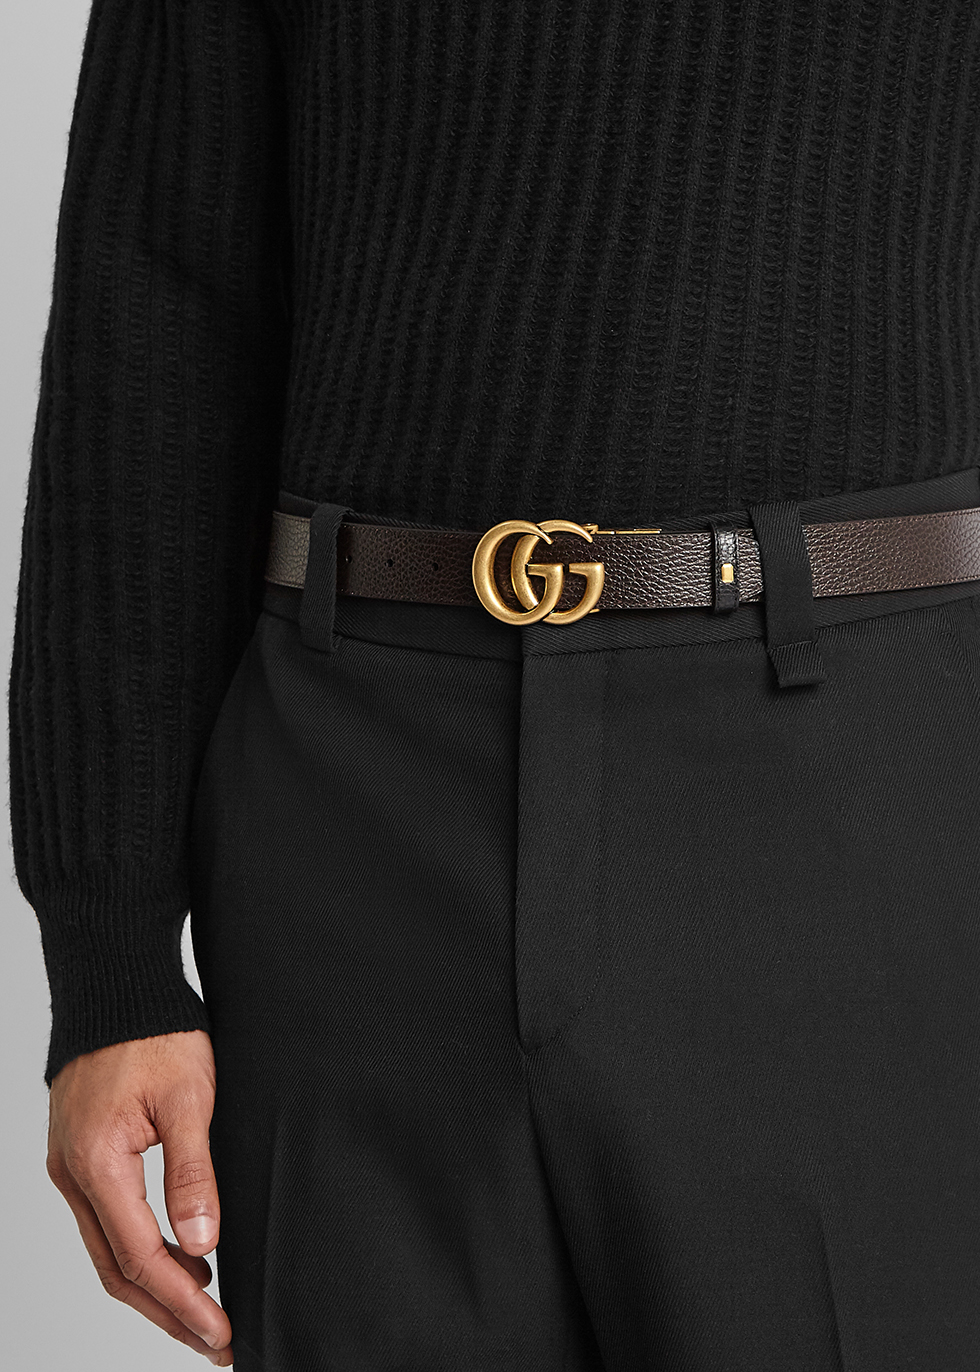 gg marmont reversible leather belt